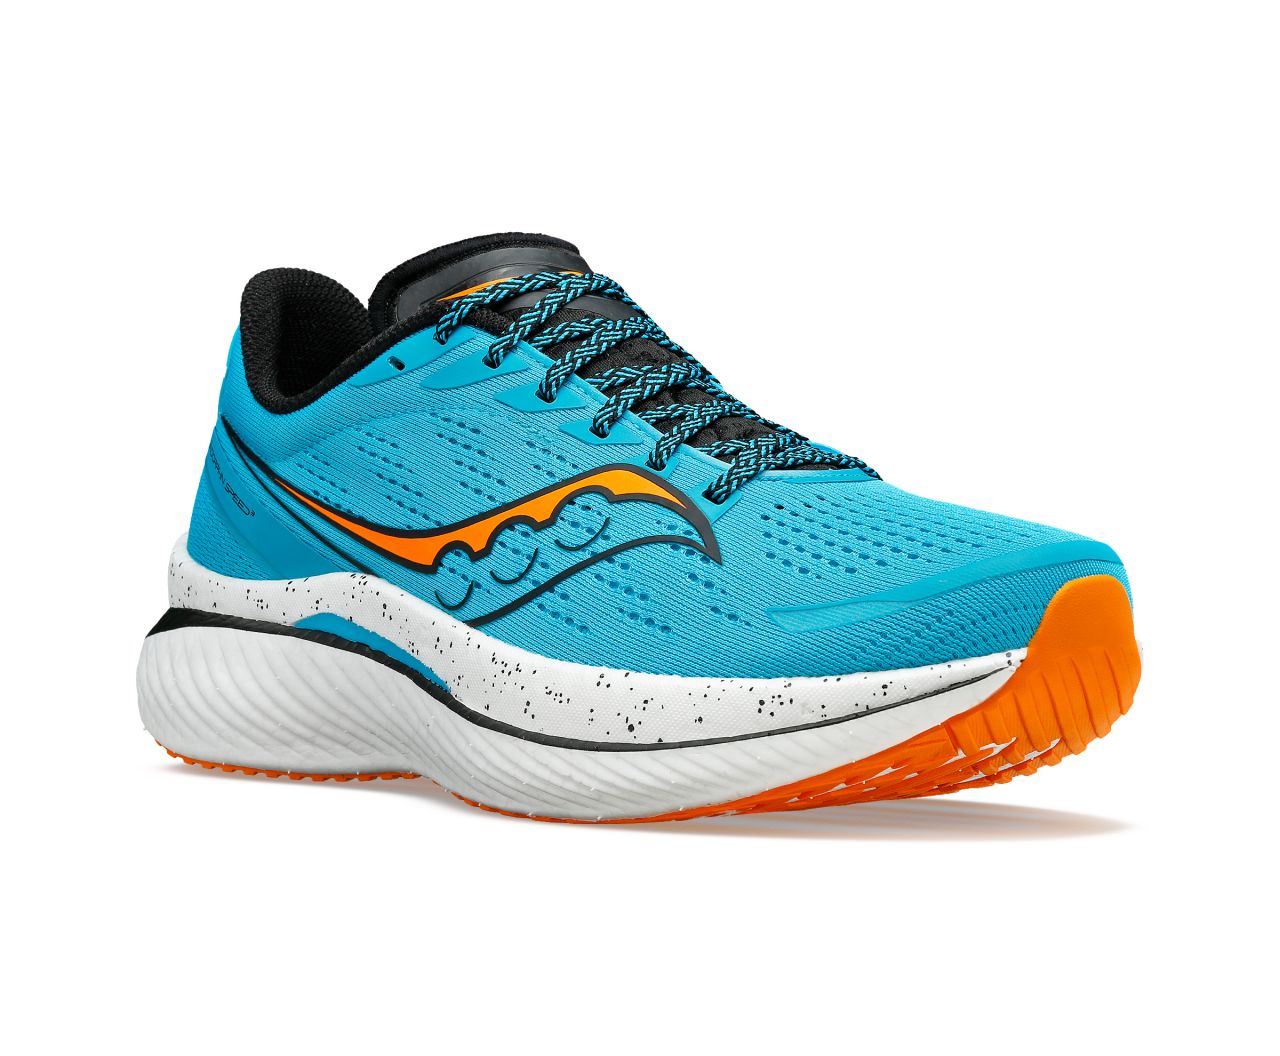 SAUCONY ENDORPHIN SPEED 3 AGAVE Chaussures running saucony